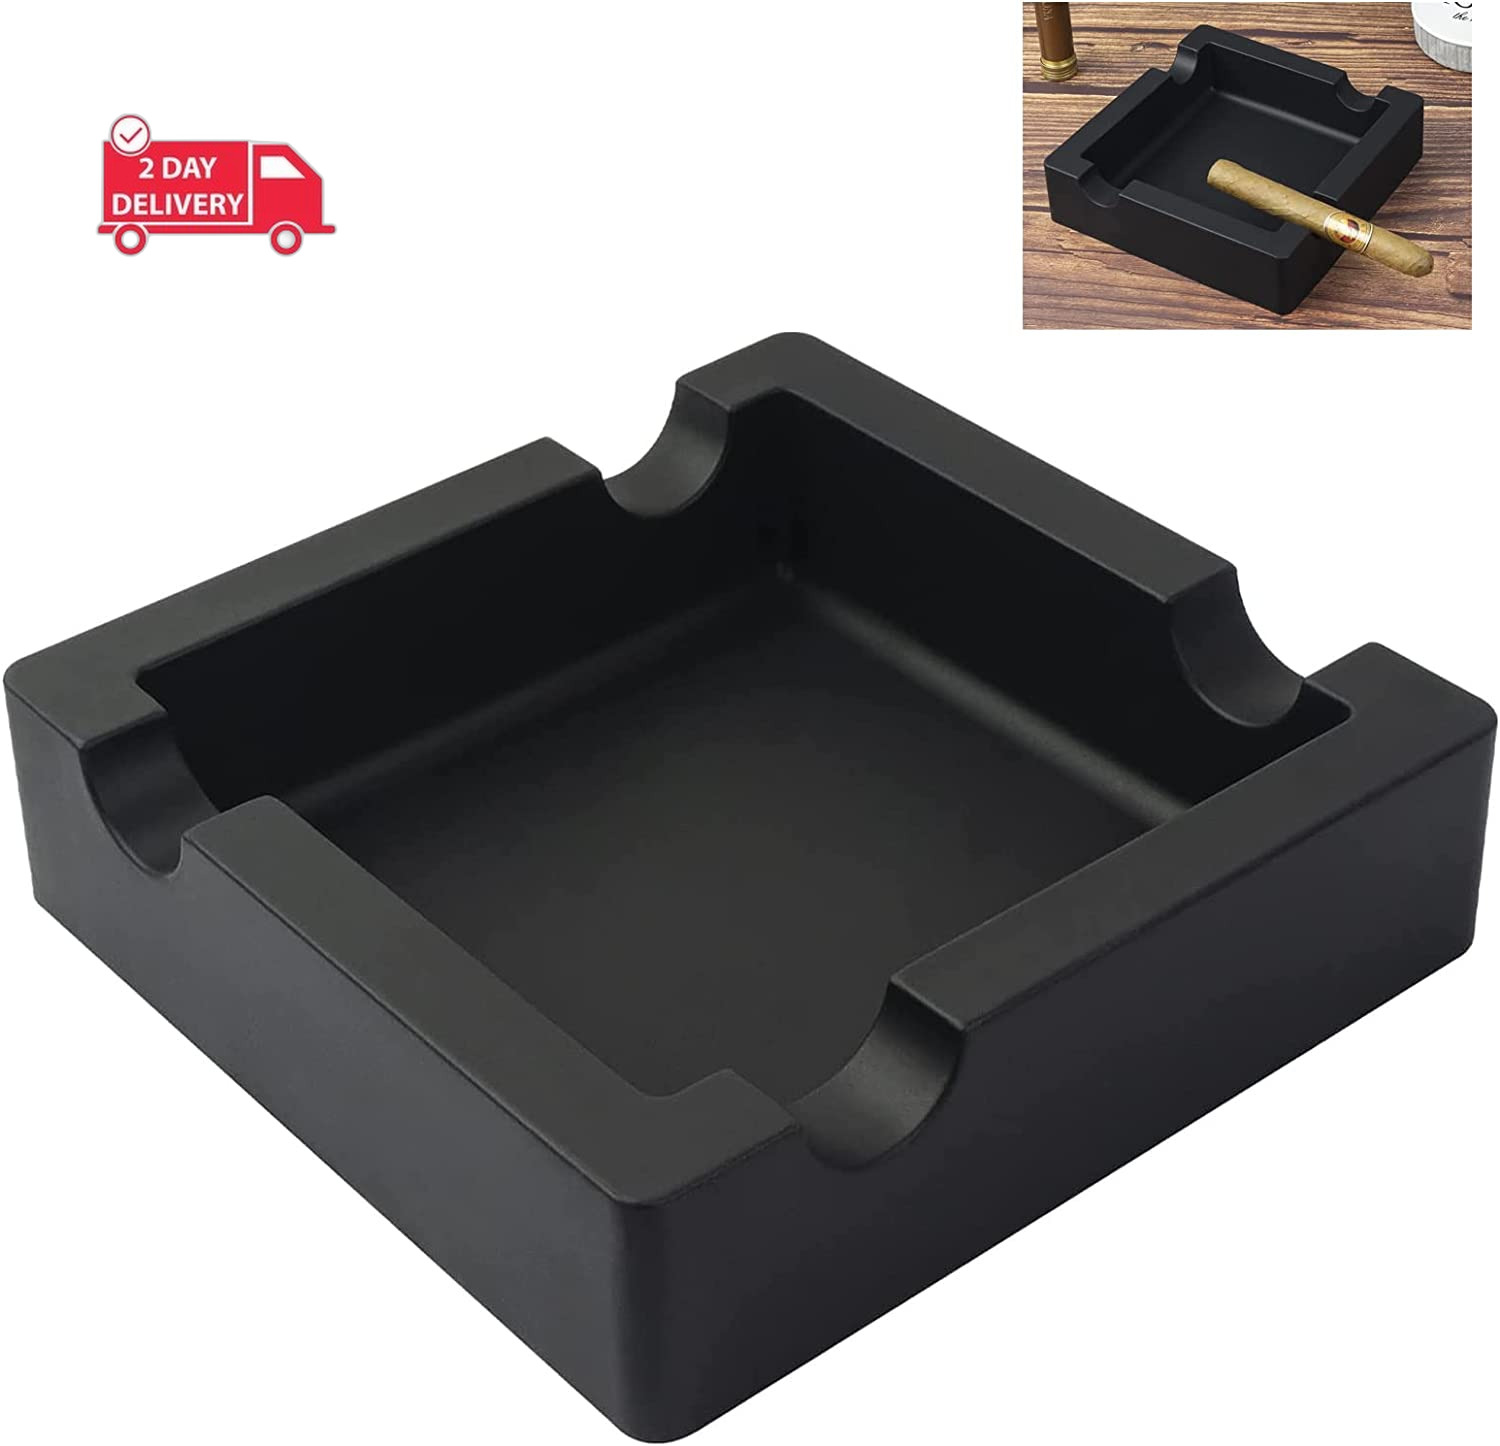 Outdoor Cigar Ashtrays Unbreakable Large Ring Gauge Silicone Ashtrays for Patio/